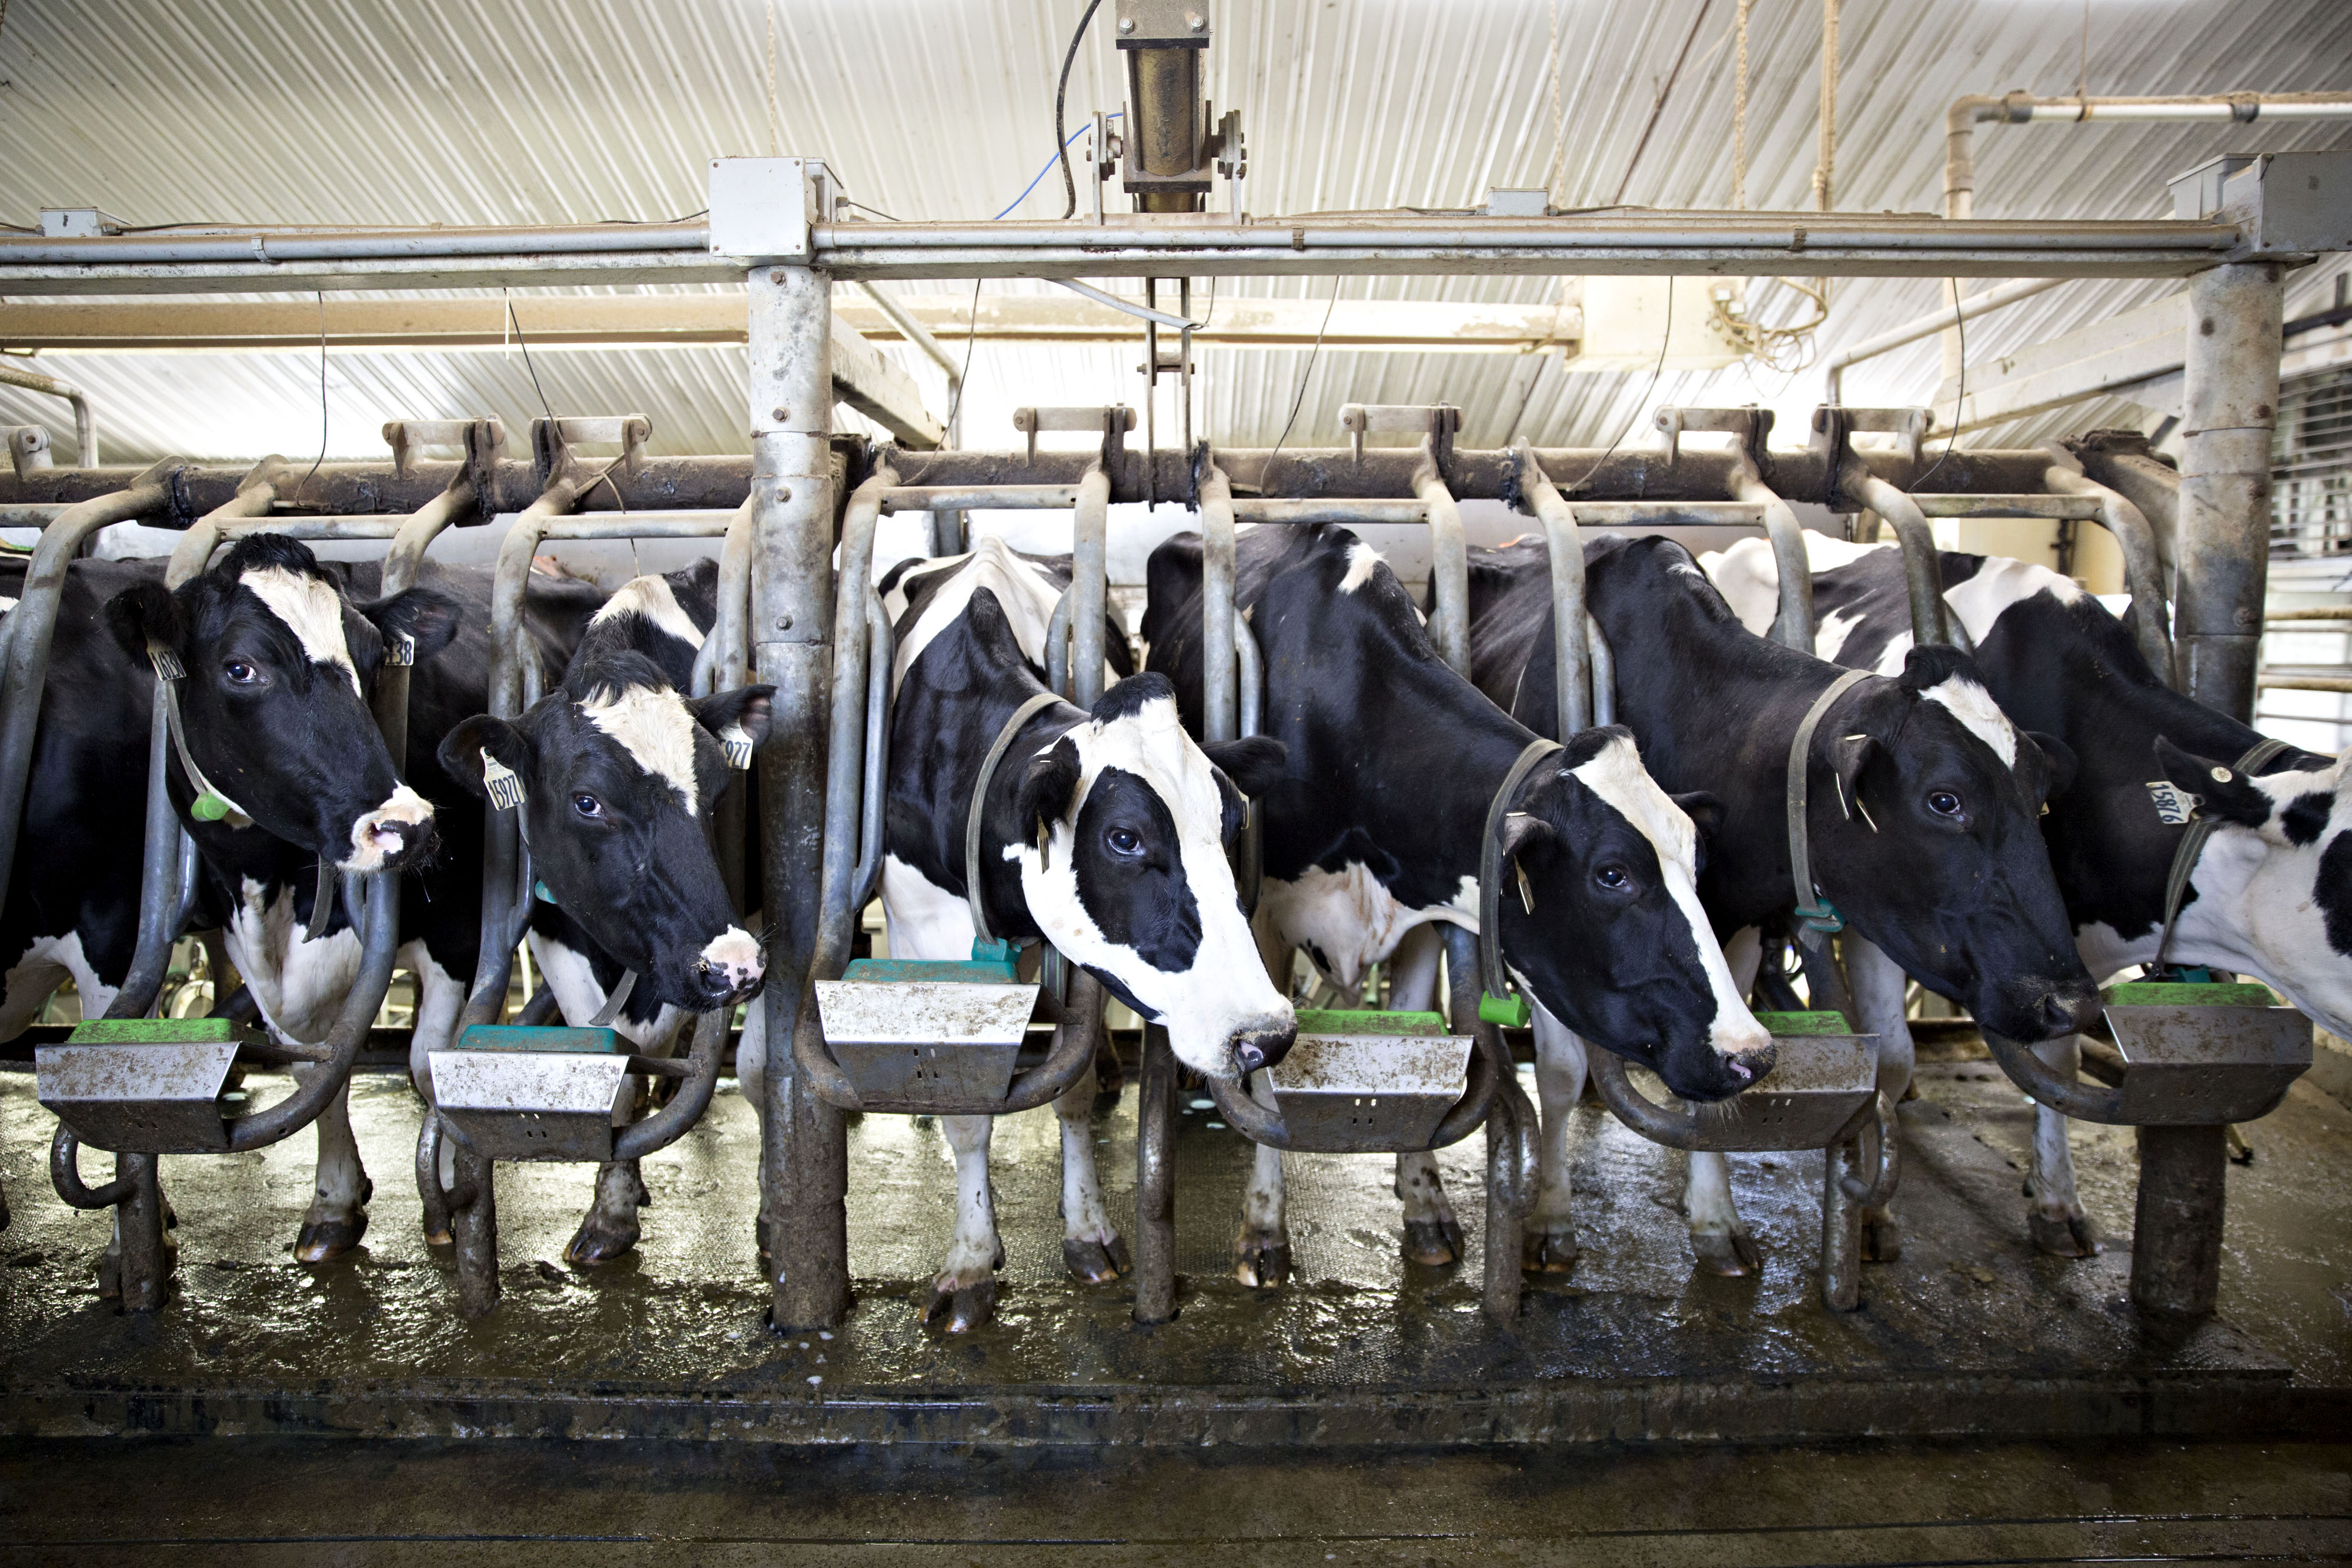 A row of confined dairy cows.